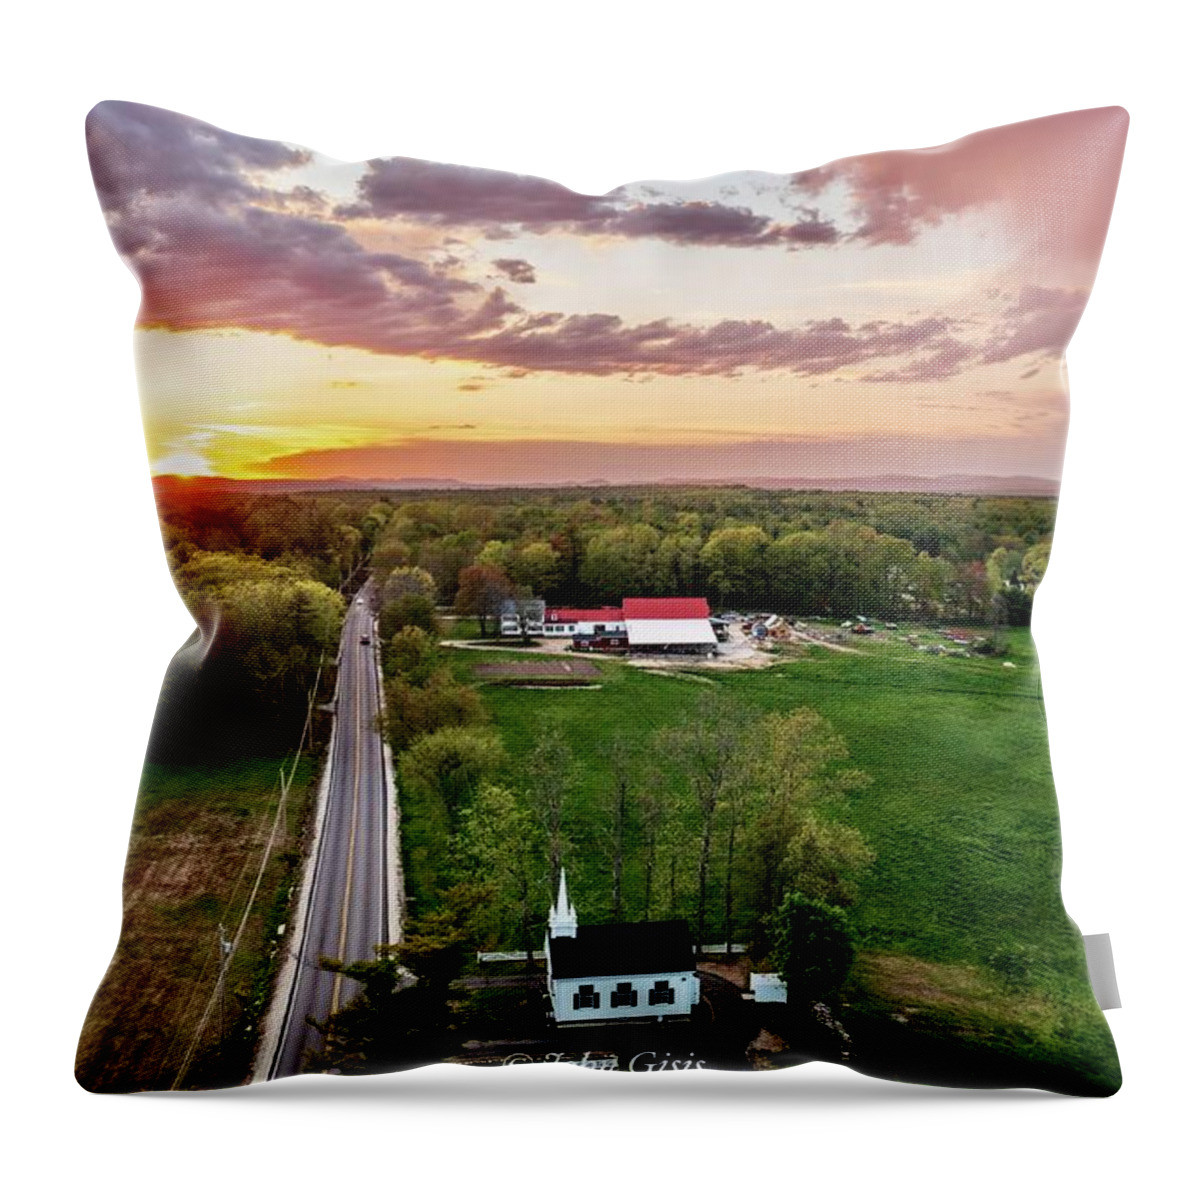  Throw Pillow featuring the photograph Rochester #103 by John Gisis